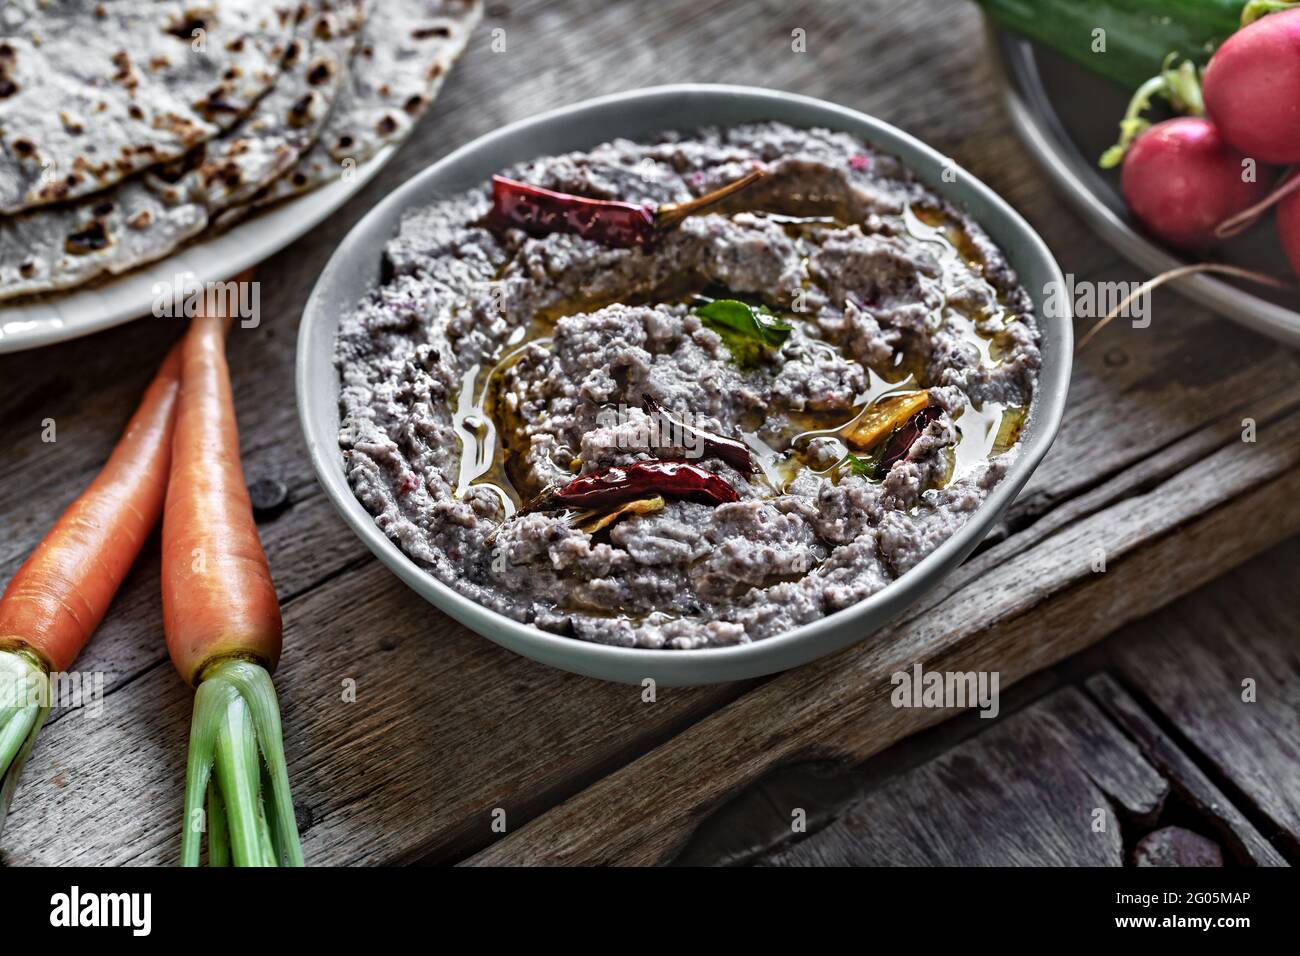 Homemade Black Bean Dip with Hebs Olive Oil ,Dried Chili by Sweet Purple Potato Tortilla and  fresh vegetables Stock Photo